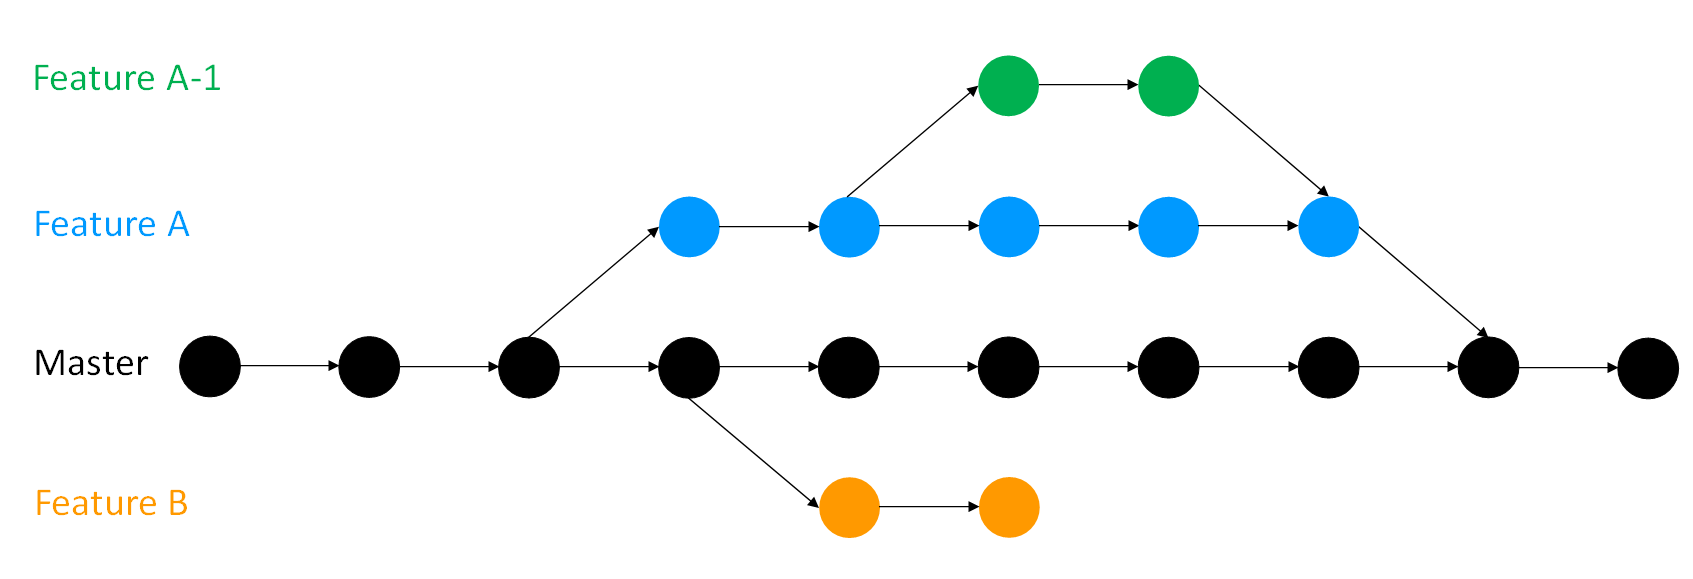 An illustration of branching in Git. There are four branches shown named main, Feature A, Feature B, and Feature A-1. Feature A and B are branches of the main branch, while Feature A-1 is a branch made from Feature A.